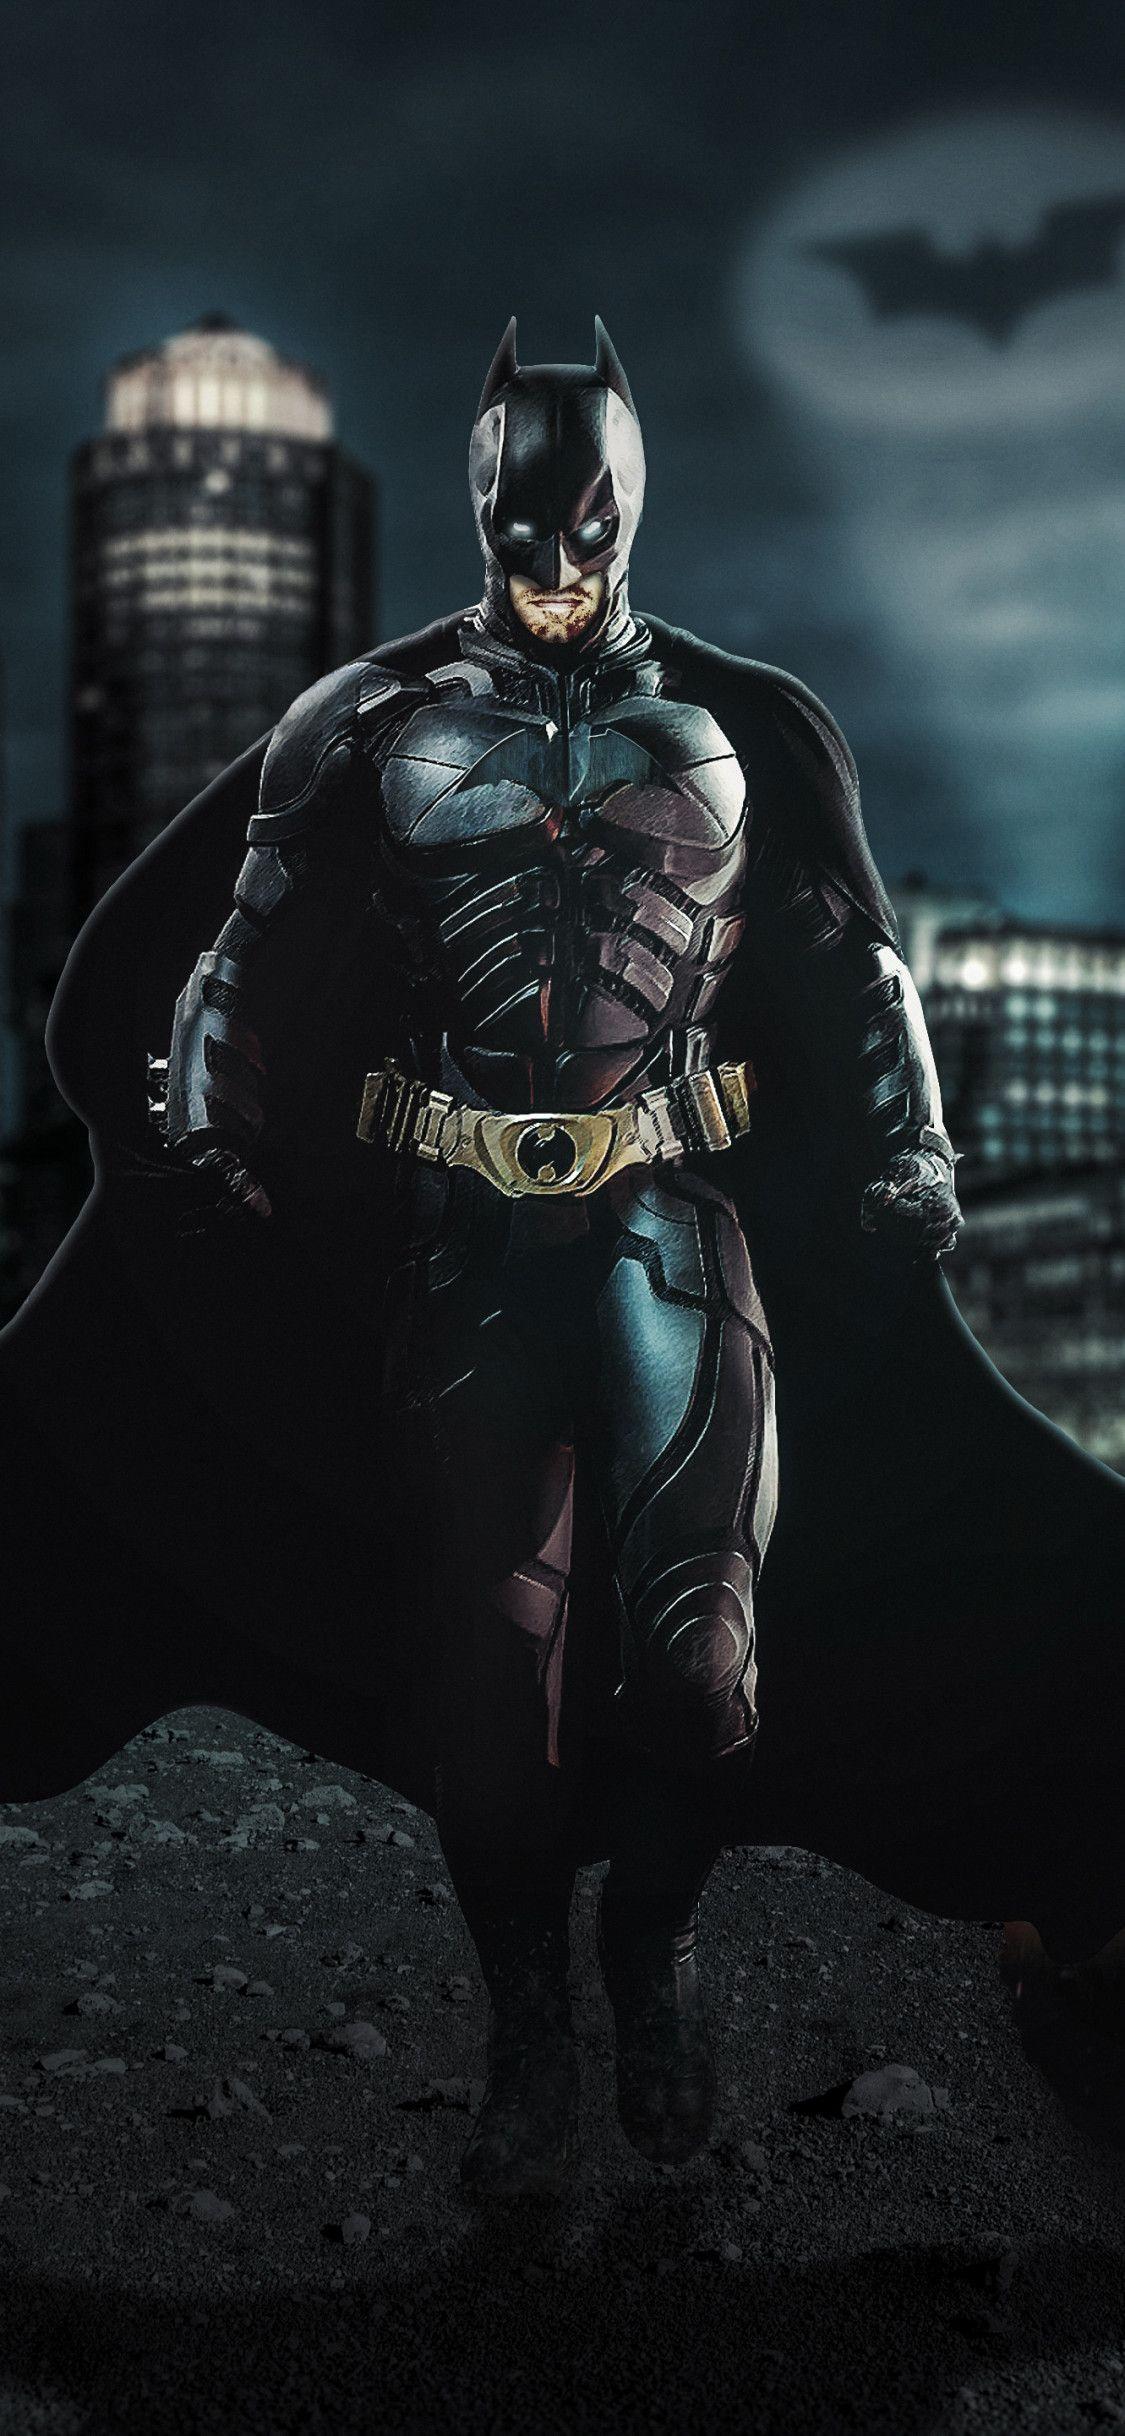 Dark Knight Iphone Wallpapers - Top Free Dark Knight Iphone Backgrounds